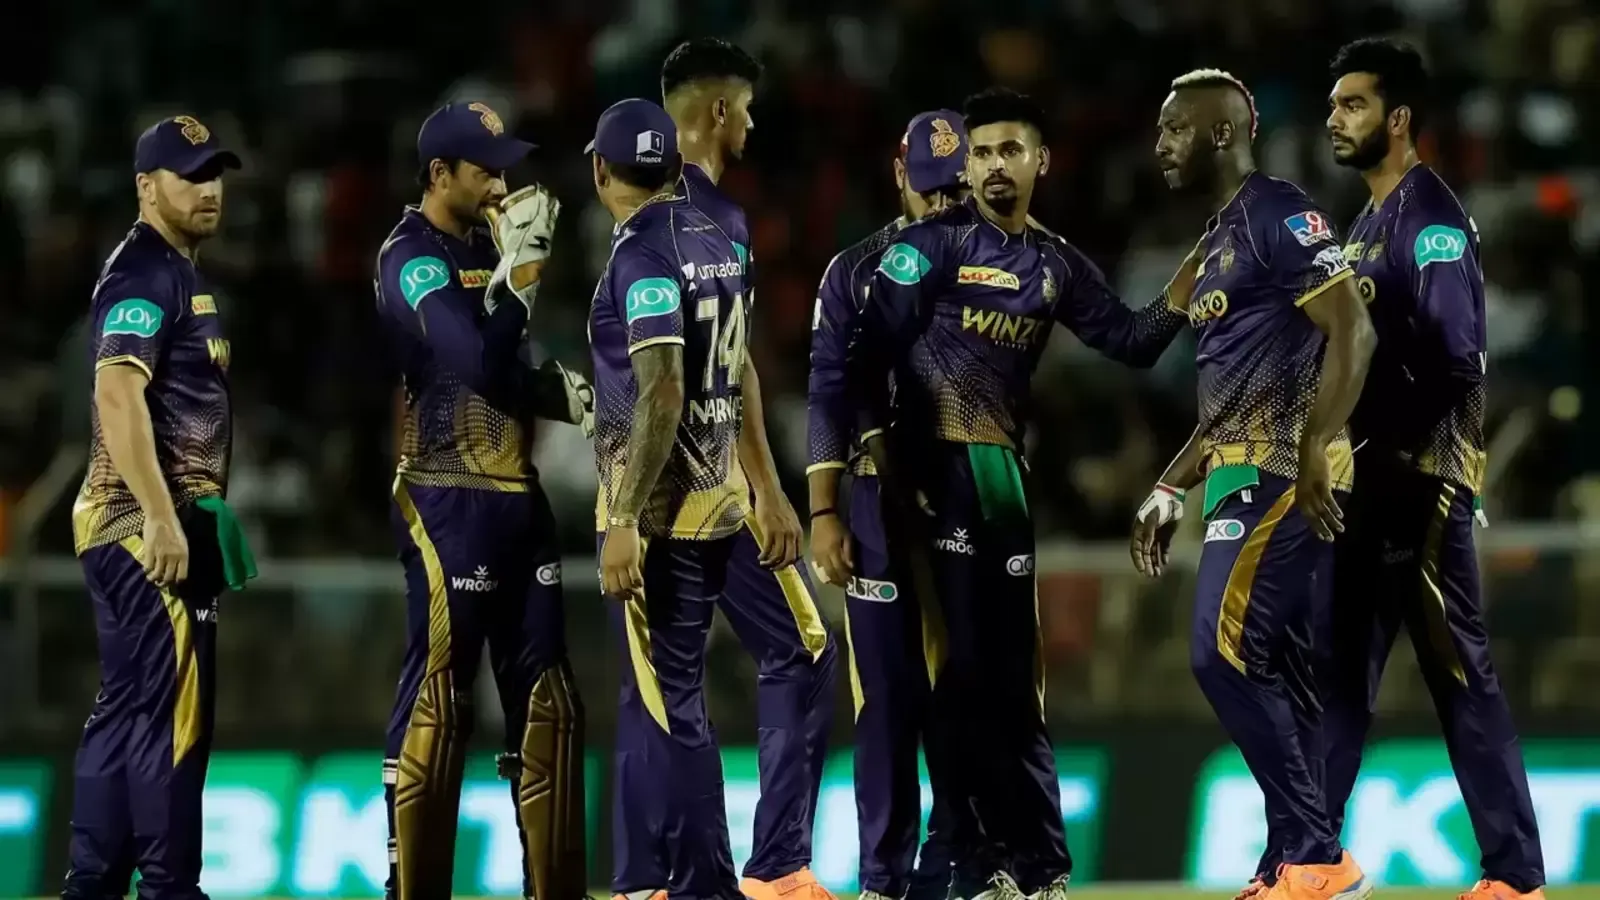 KKR Vs LSG IPL 2022 Match 66: Full Preview, Probable XIs, Pitch Report, And Dream11 Team Prediction | SportzPoint.com